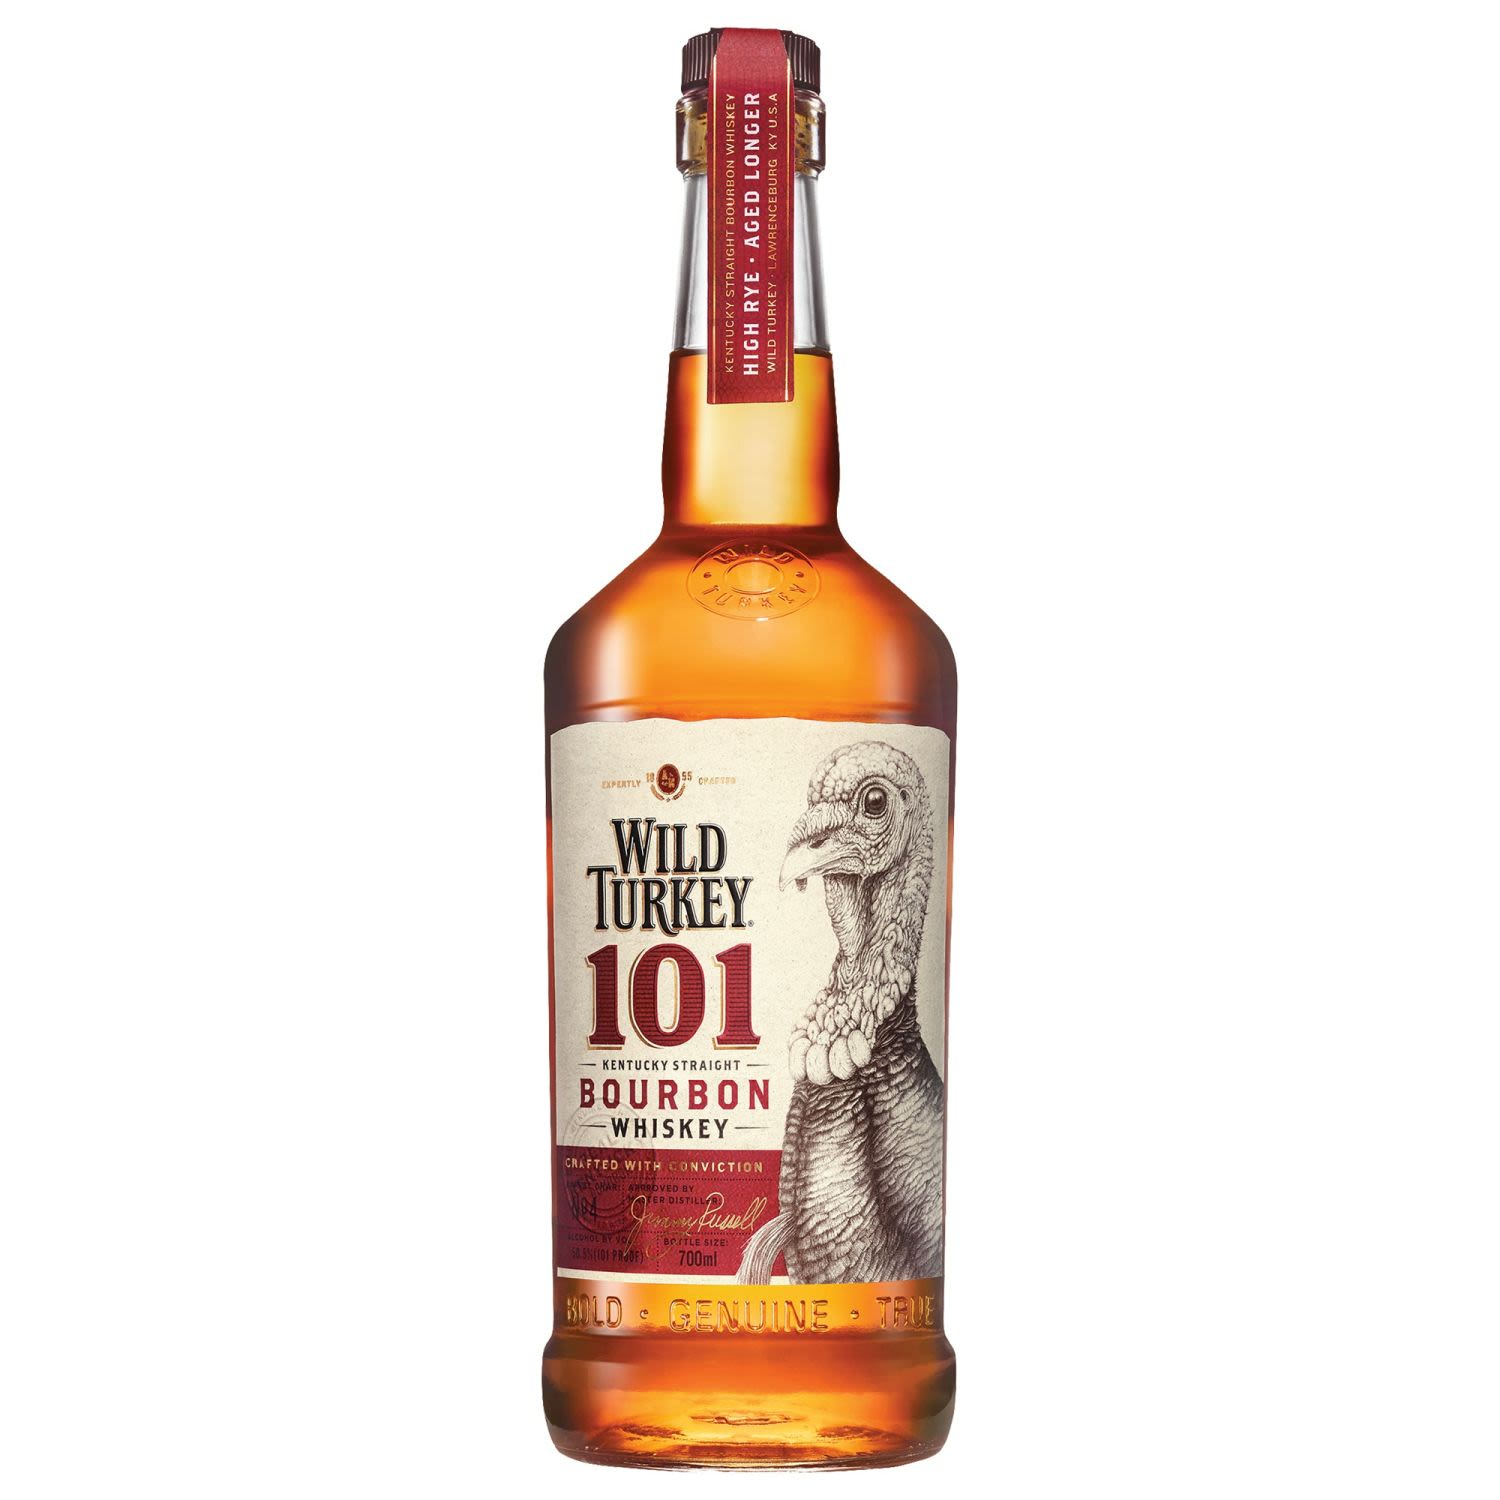 Wild Turkey 101 is a genuine full-bodied super-premium Bourbon. Its high Rye content gives it that Wild Turkey signature kick. Wild Turkey 101 has anexceptionally gentle and rich aroma for a high proof bourbon, thanks to it's uncompromising approach to the quality distillation processes.<br /> <br />Alcohol Volume: 50.50%<br /><br />Pack Format: Bottle<br /><br />Standard Drinks: 28</br /><br />Pack Type: Bottle<br /><br />Country of Origin: USA<br />